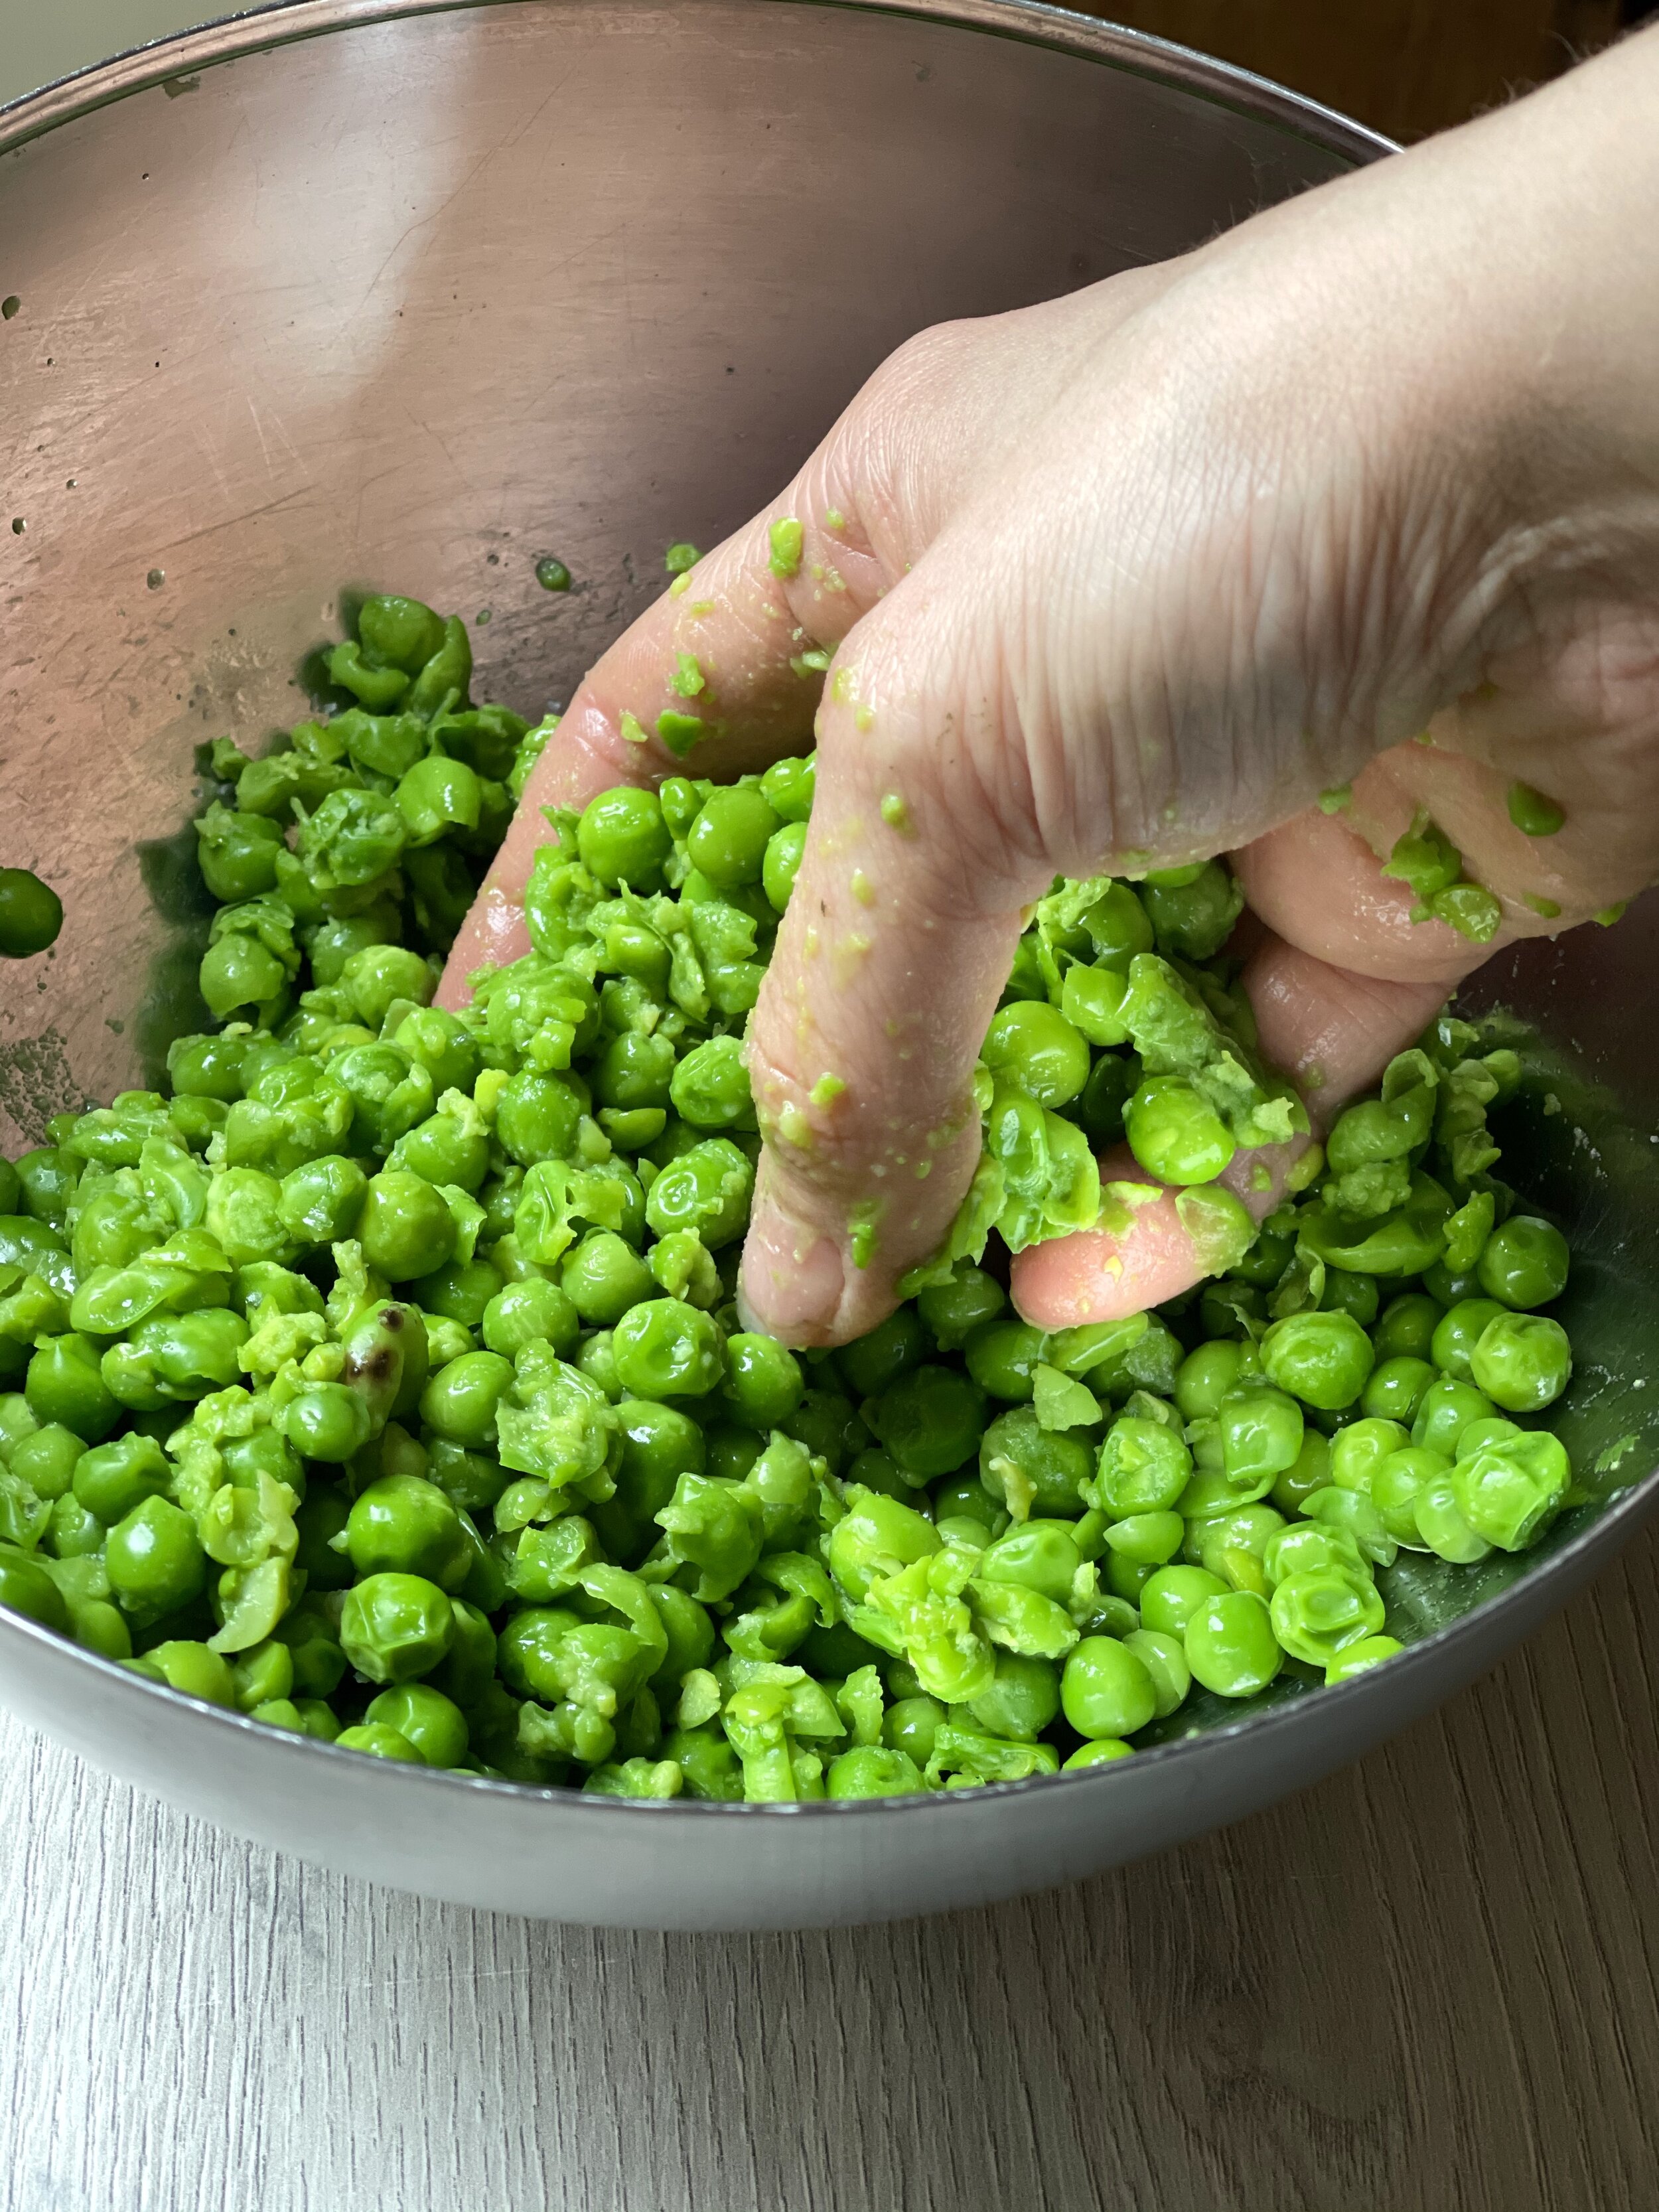 Pea fritter ingredients